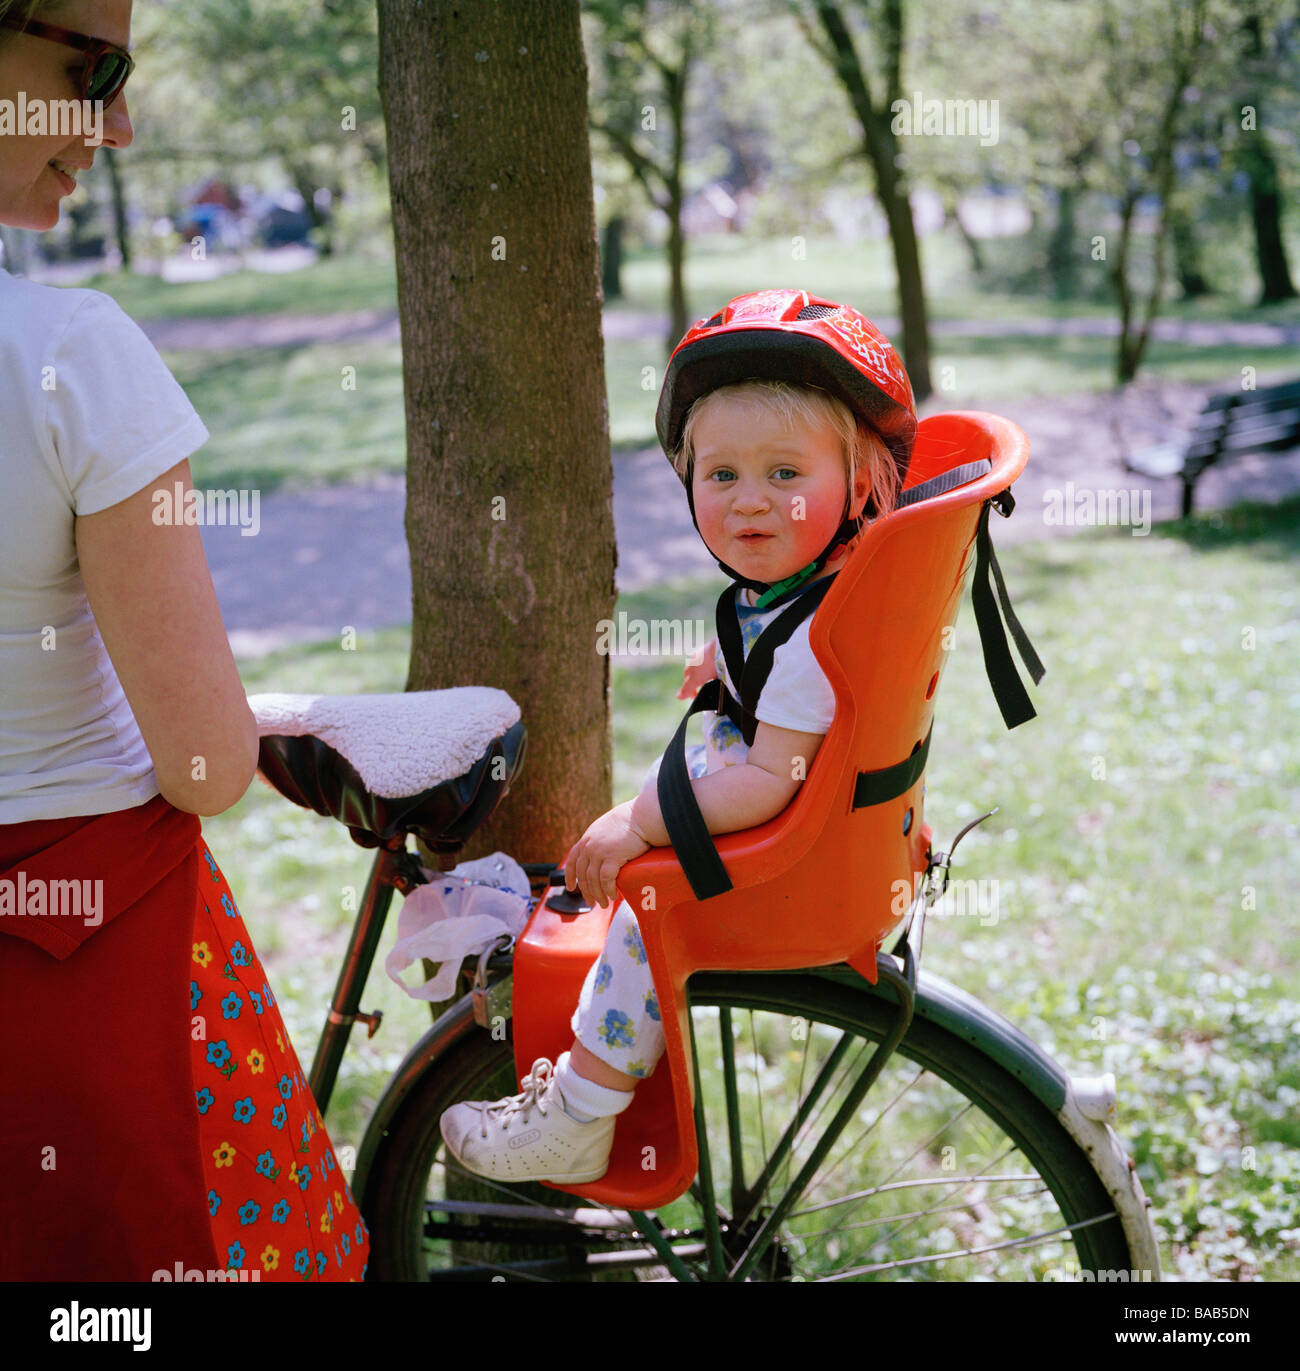 A Little Girl Sitting In A Child's Seat On A Bicycle Sweden. Stock Photo